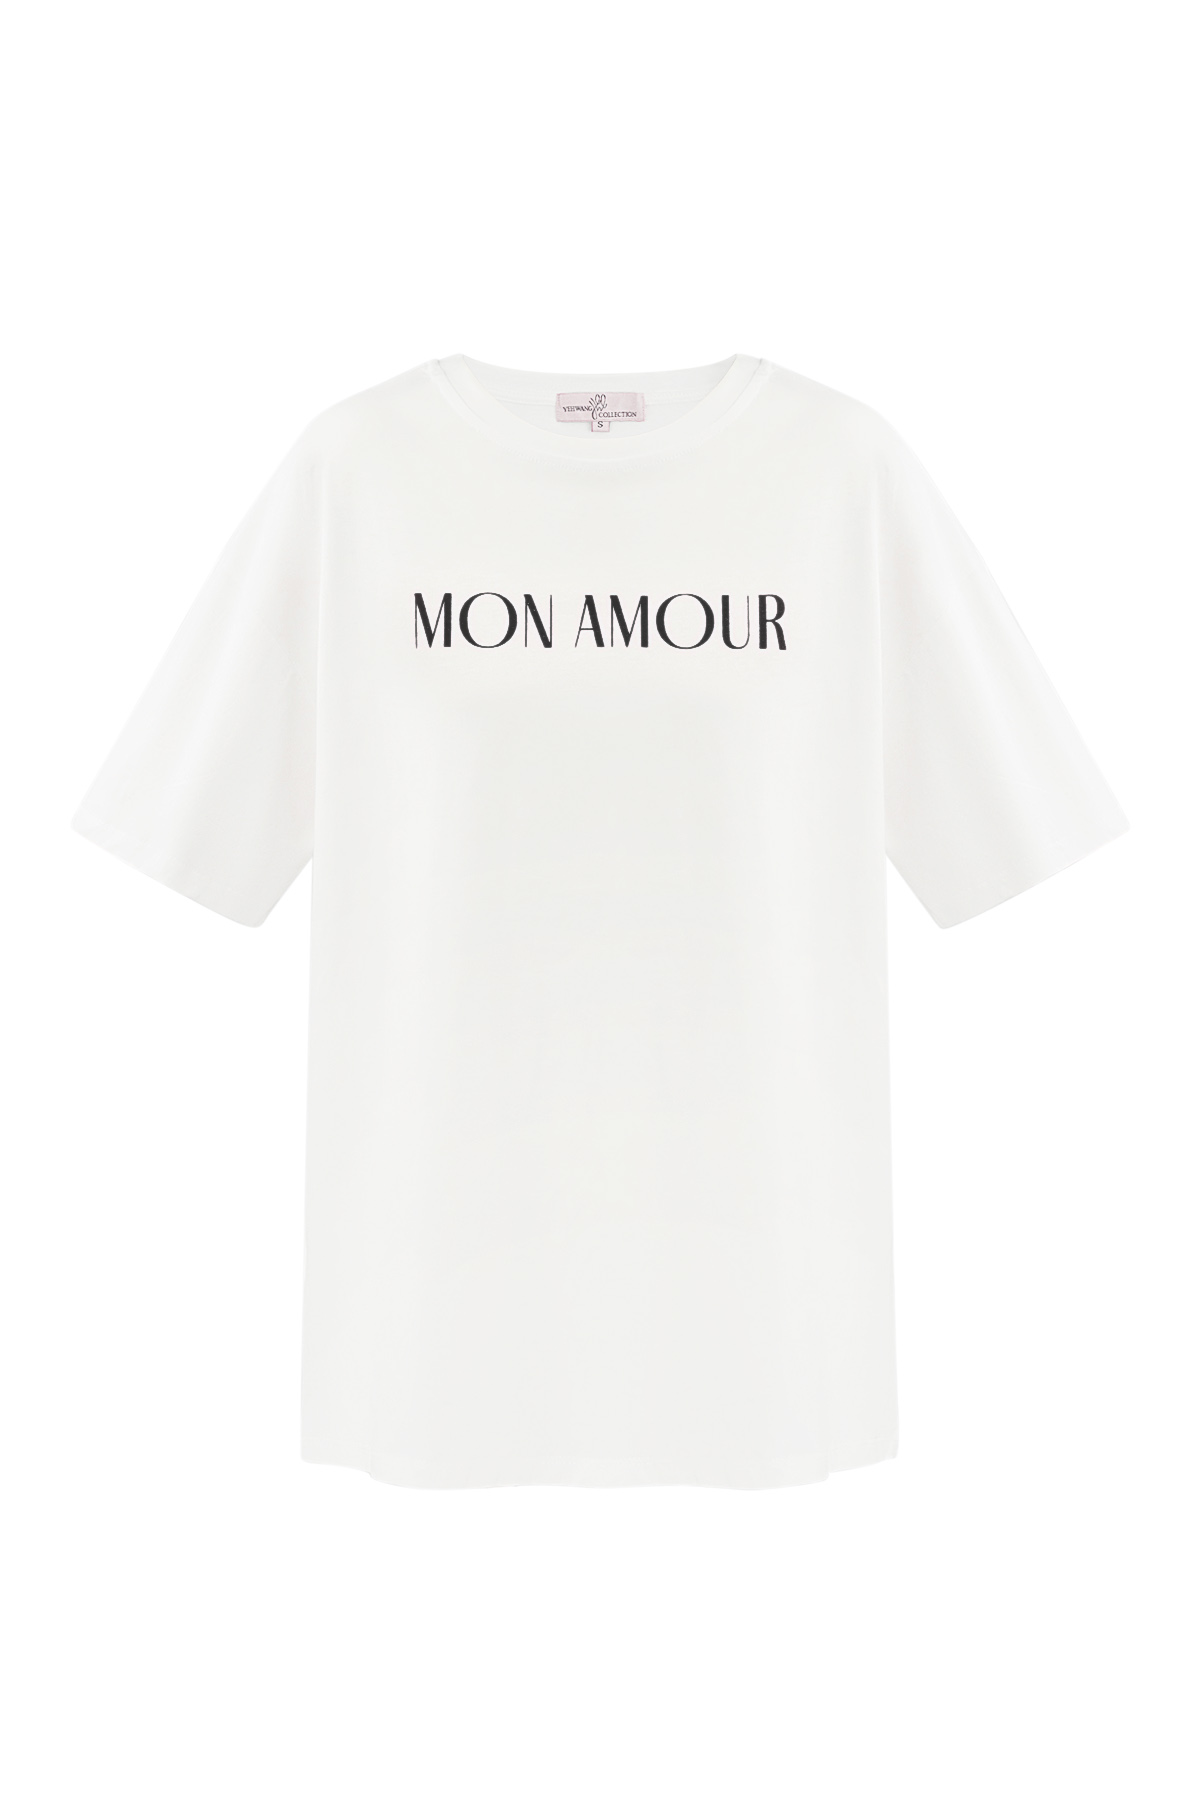 T-shirt mon amour - black and white